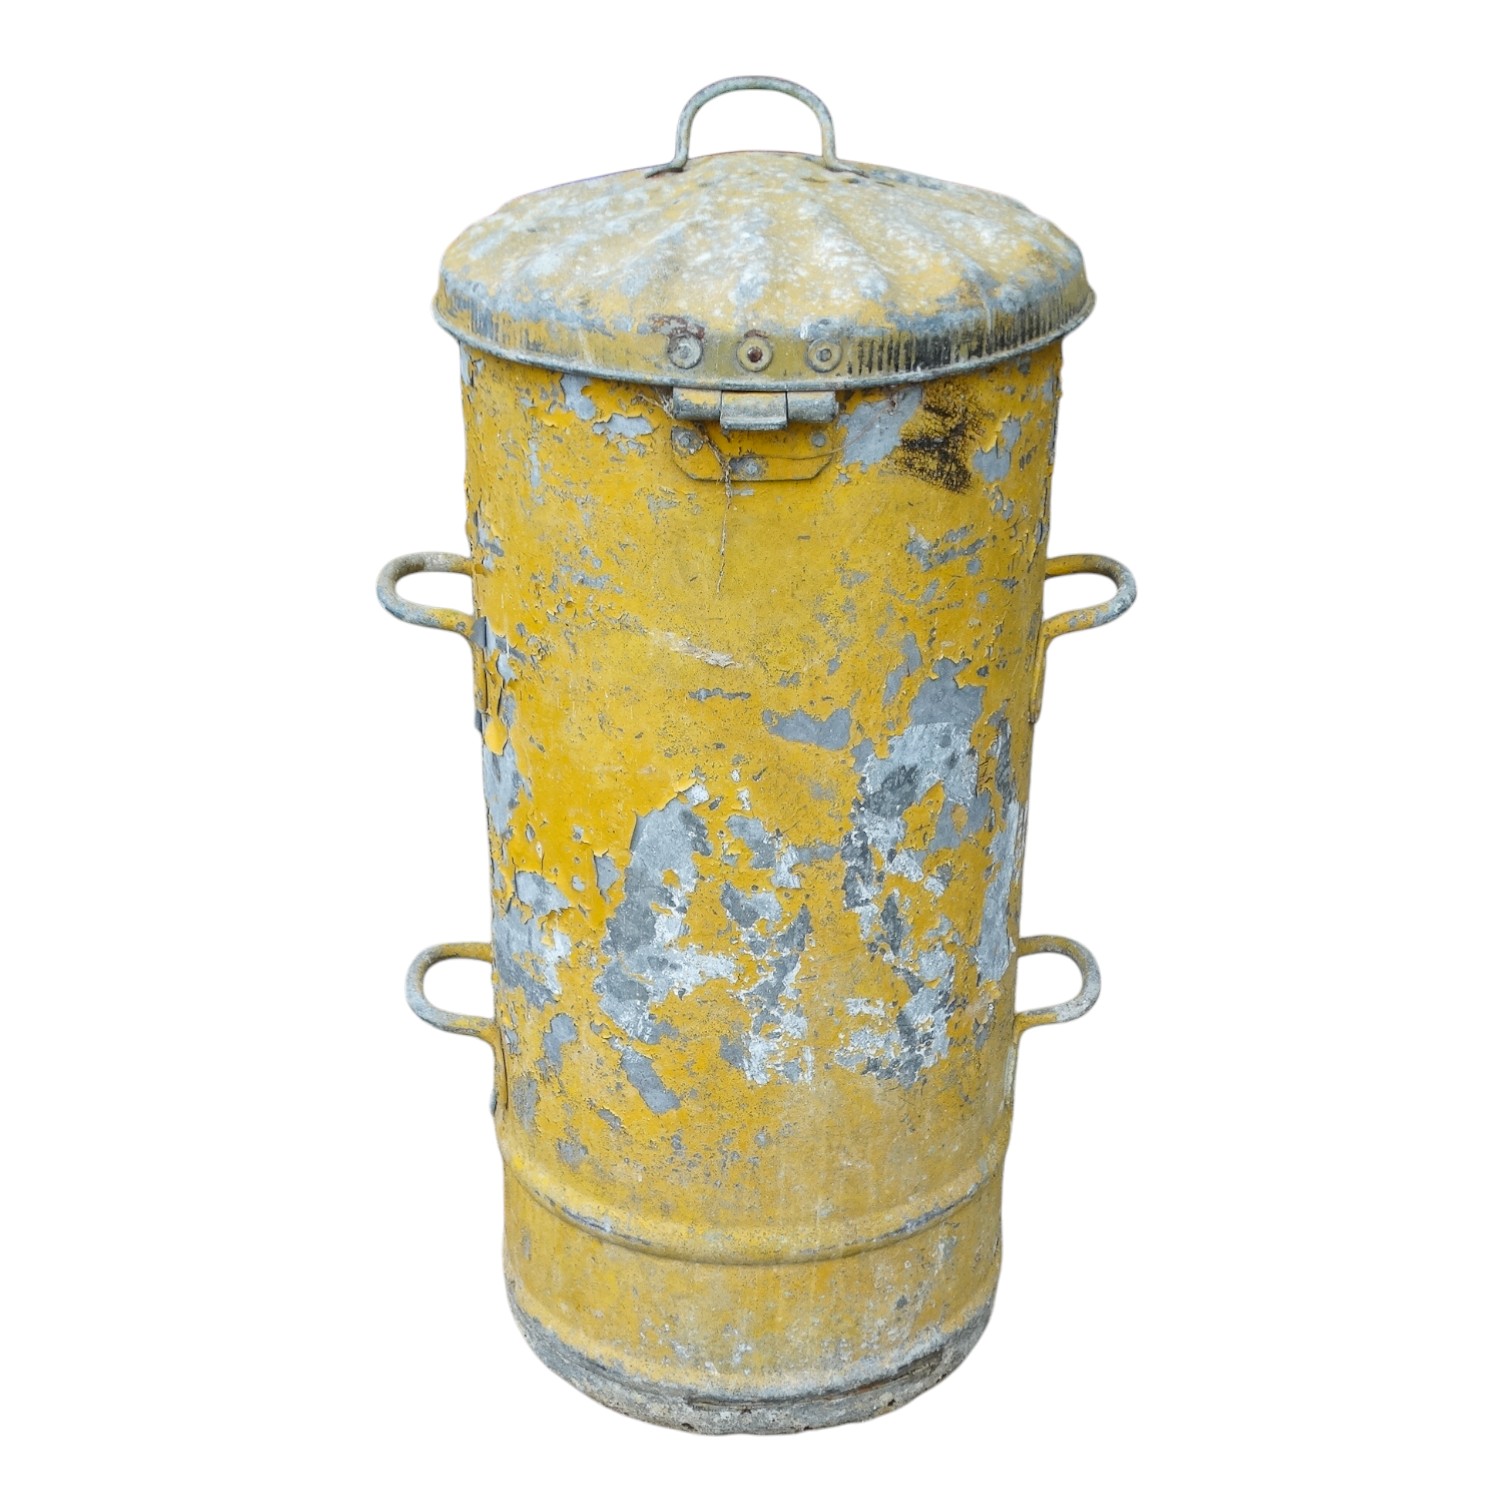 An early 20th century galvanised feed bin - with four handles and hinged cover, in a distressed